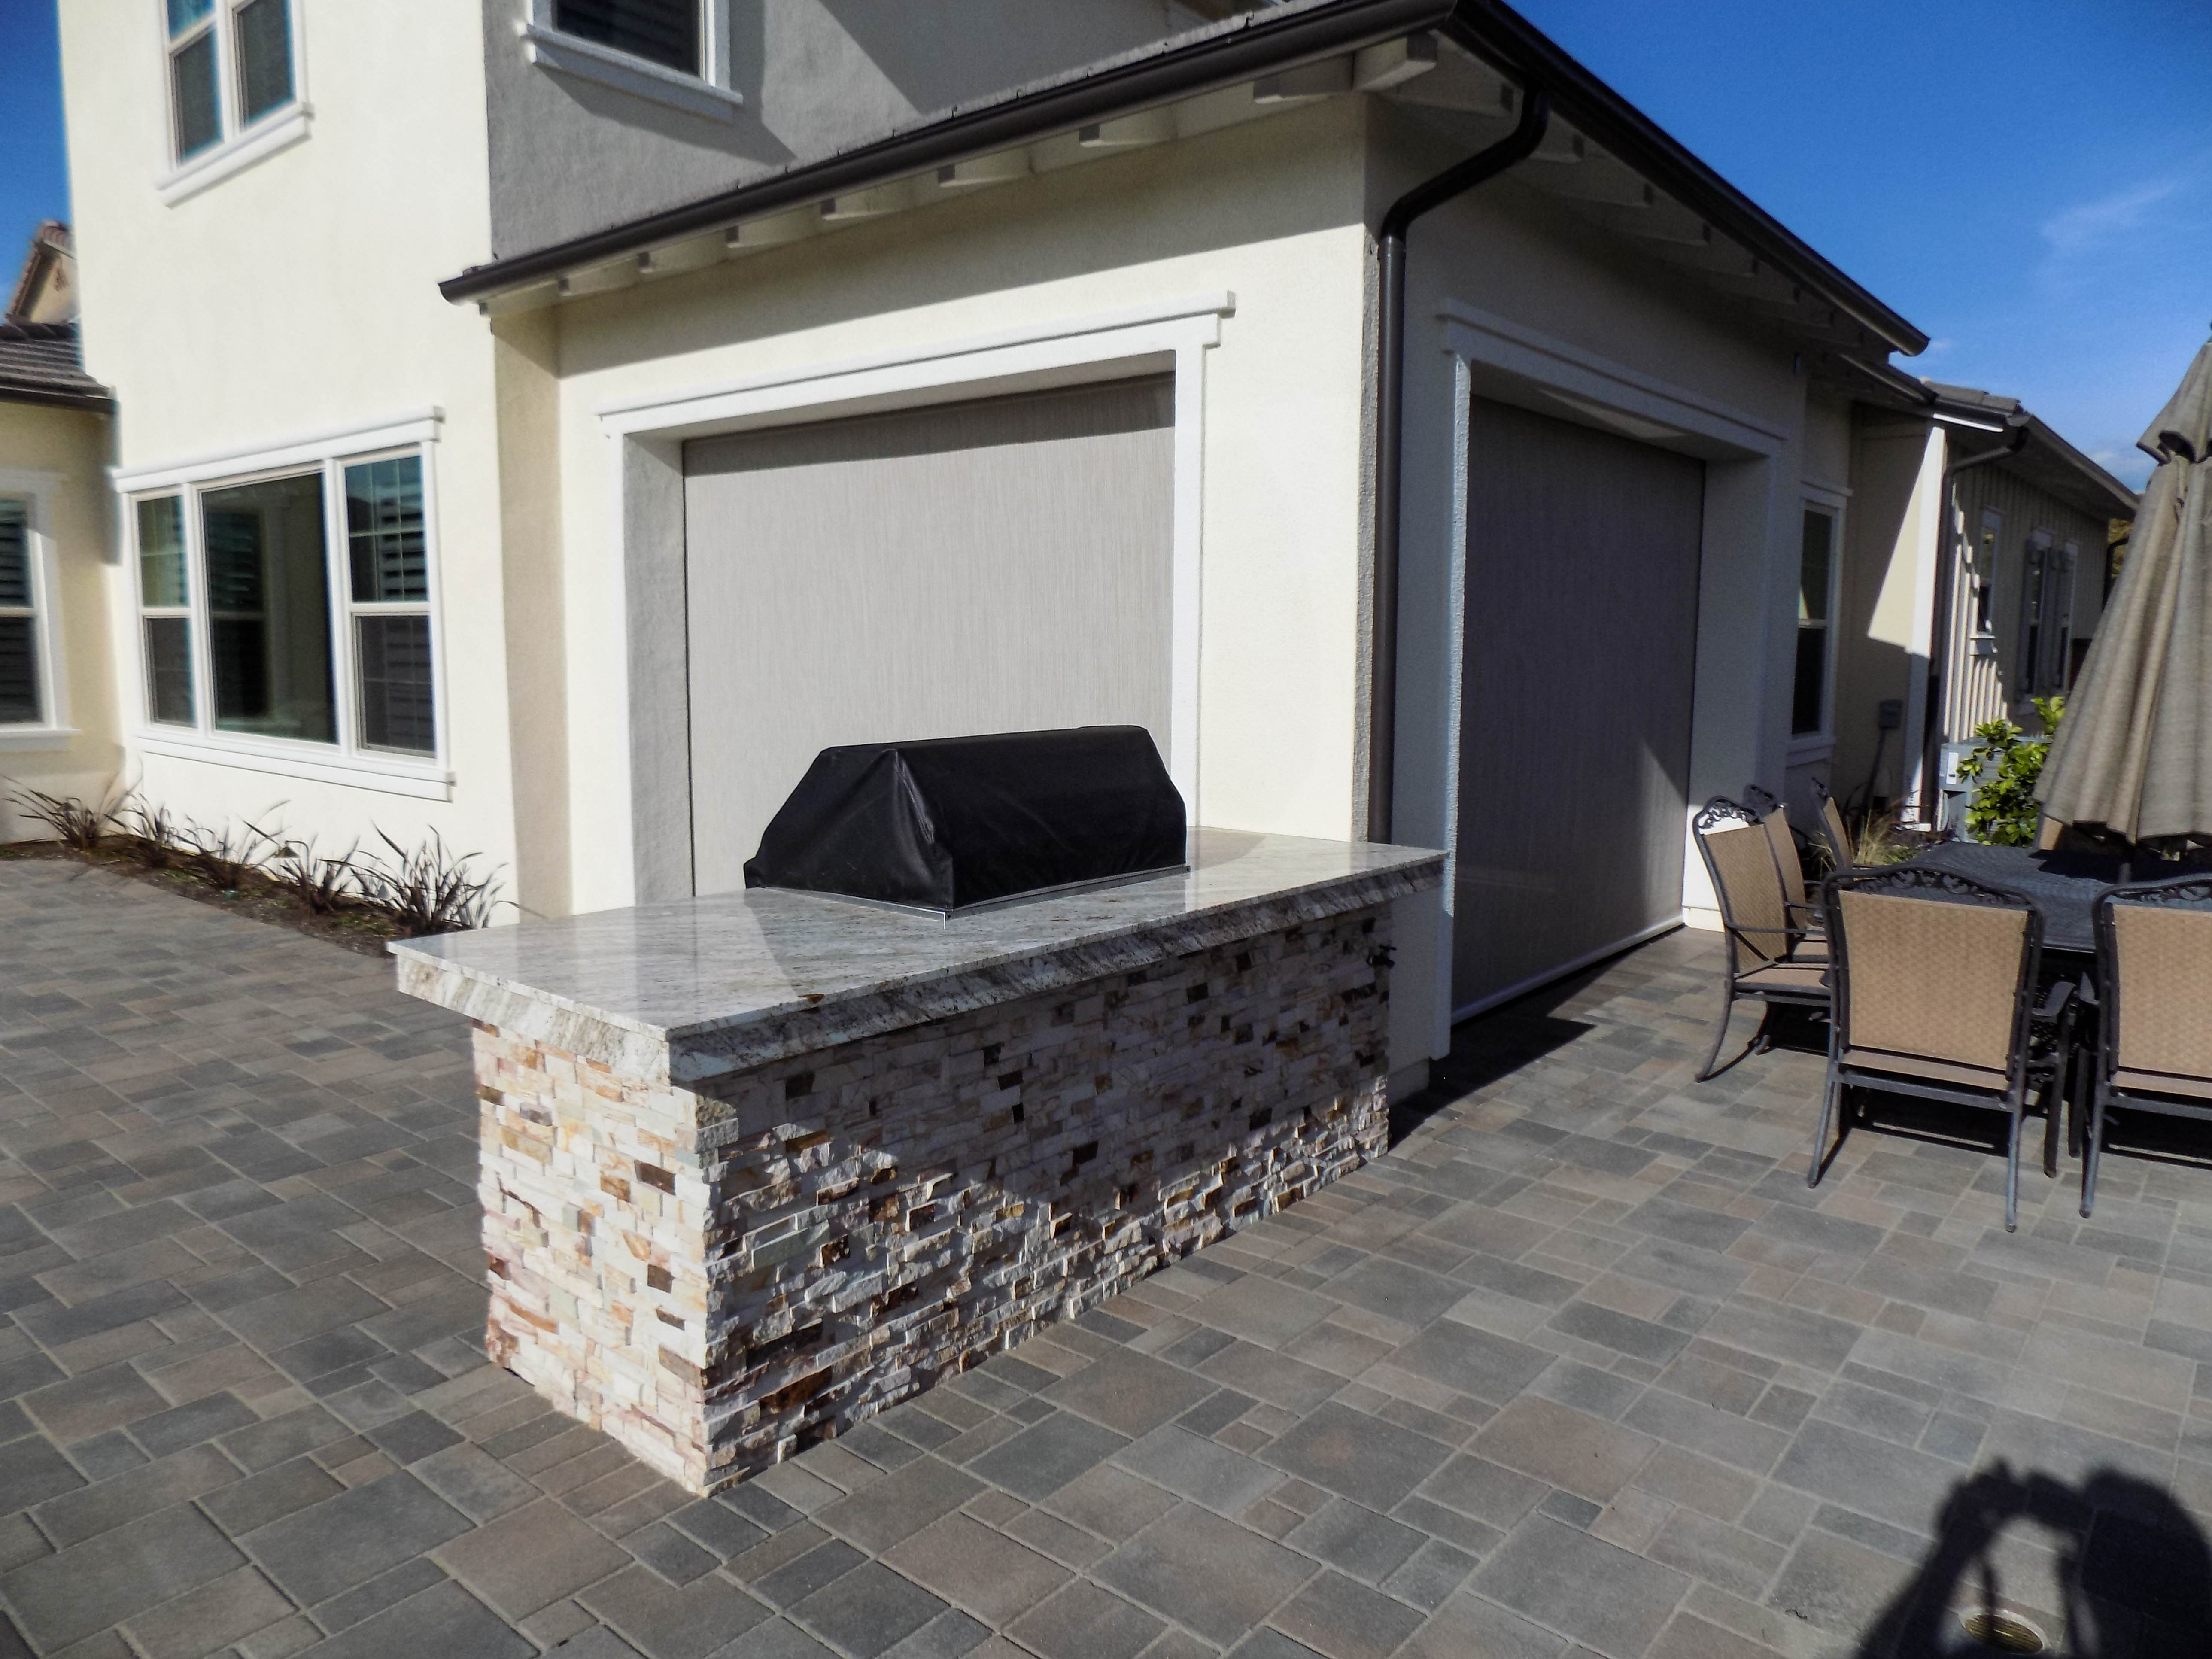 Motorized Power Screens on outdoor living space